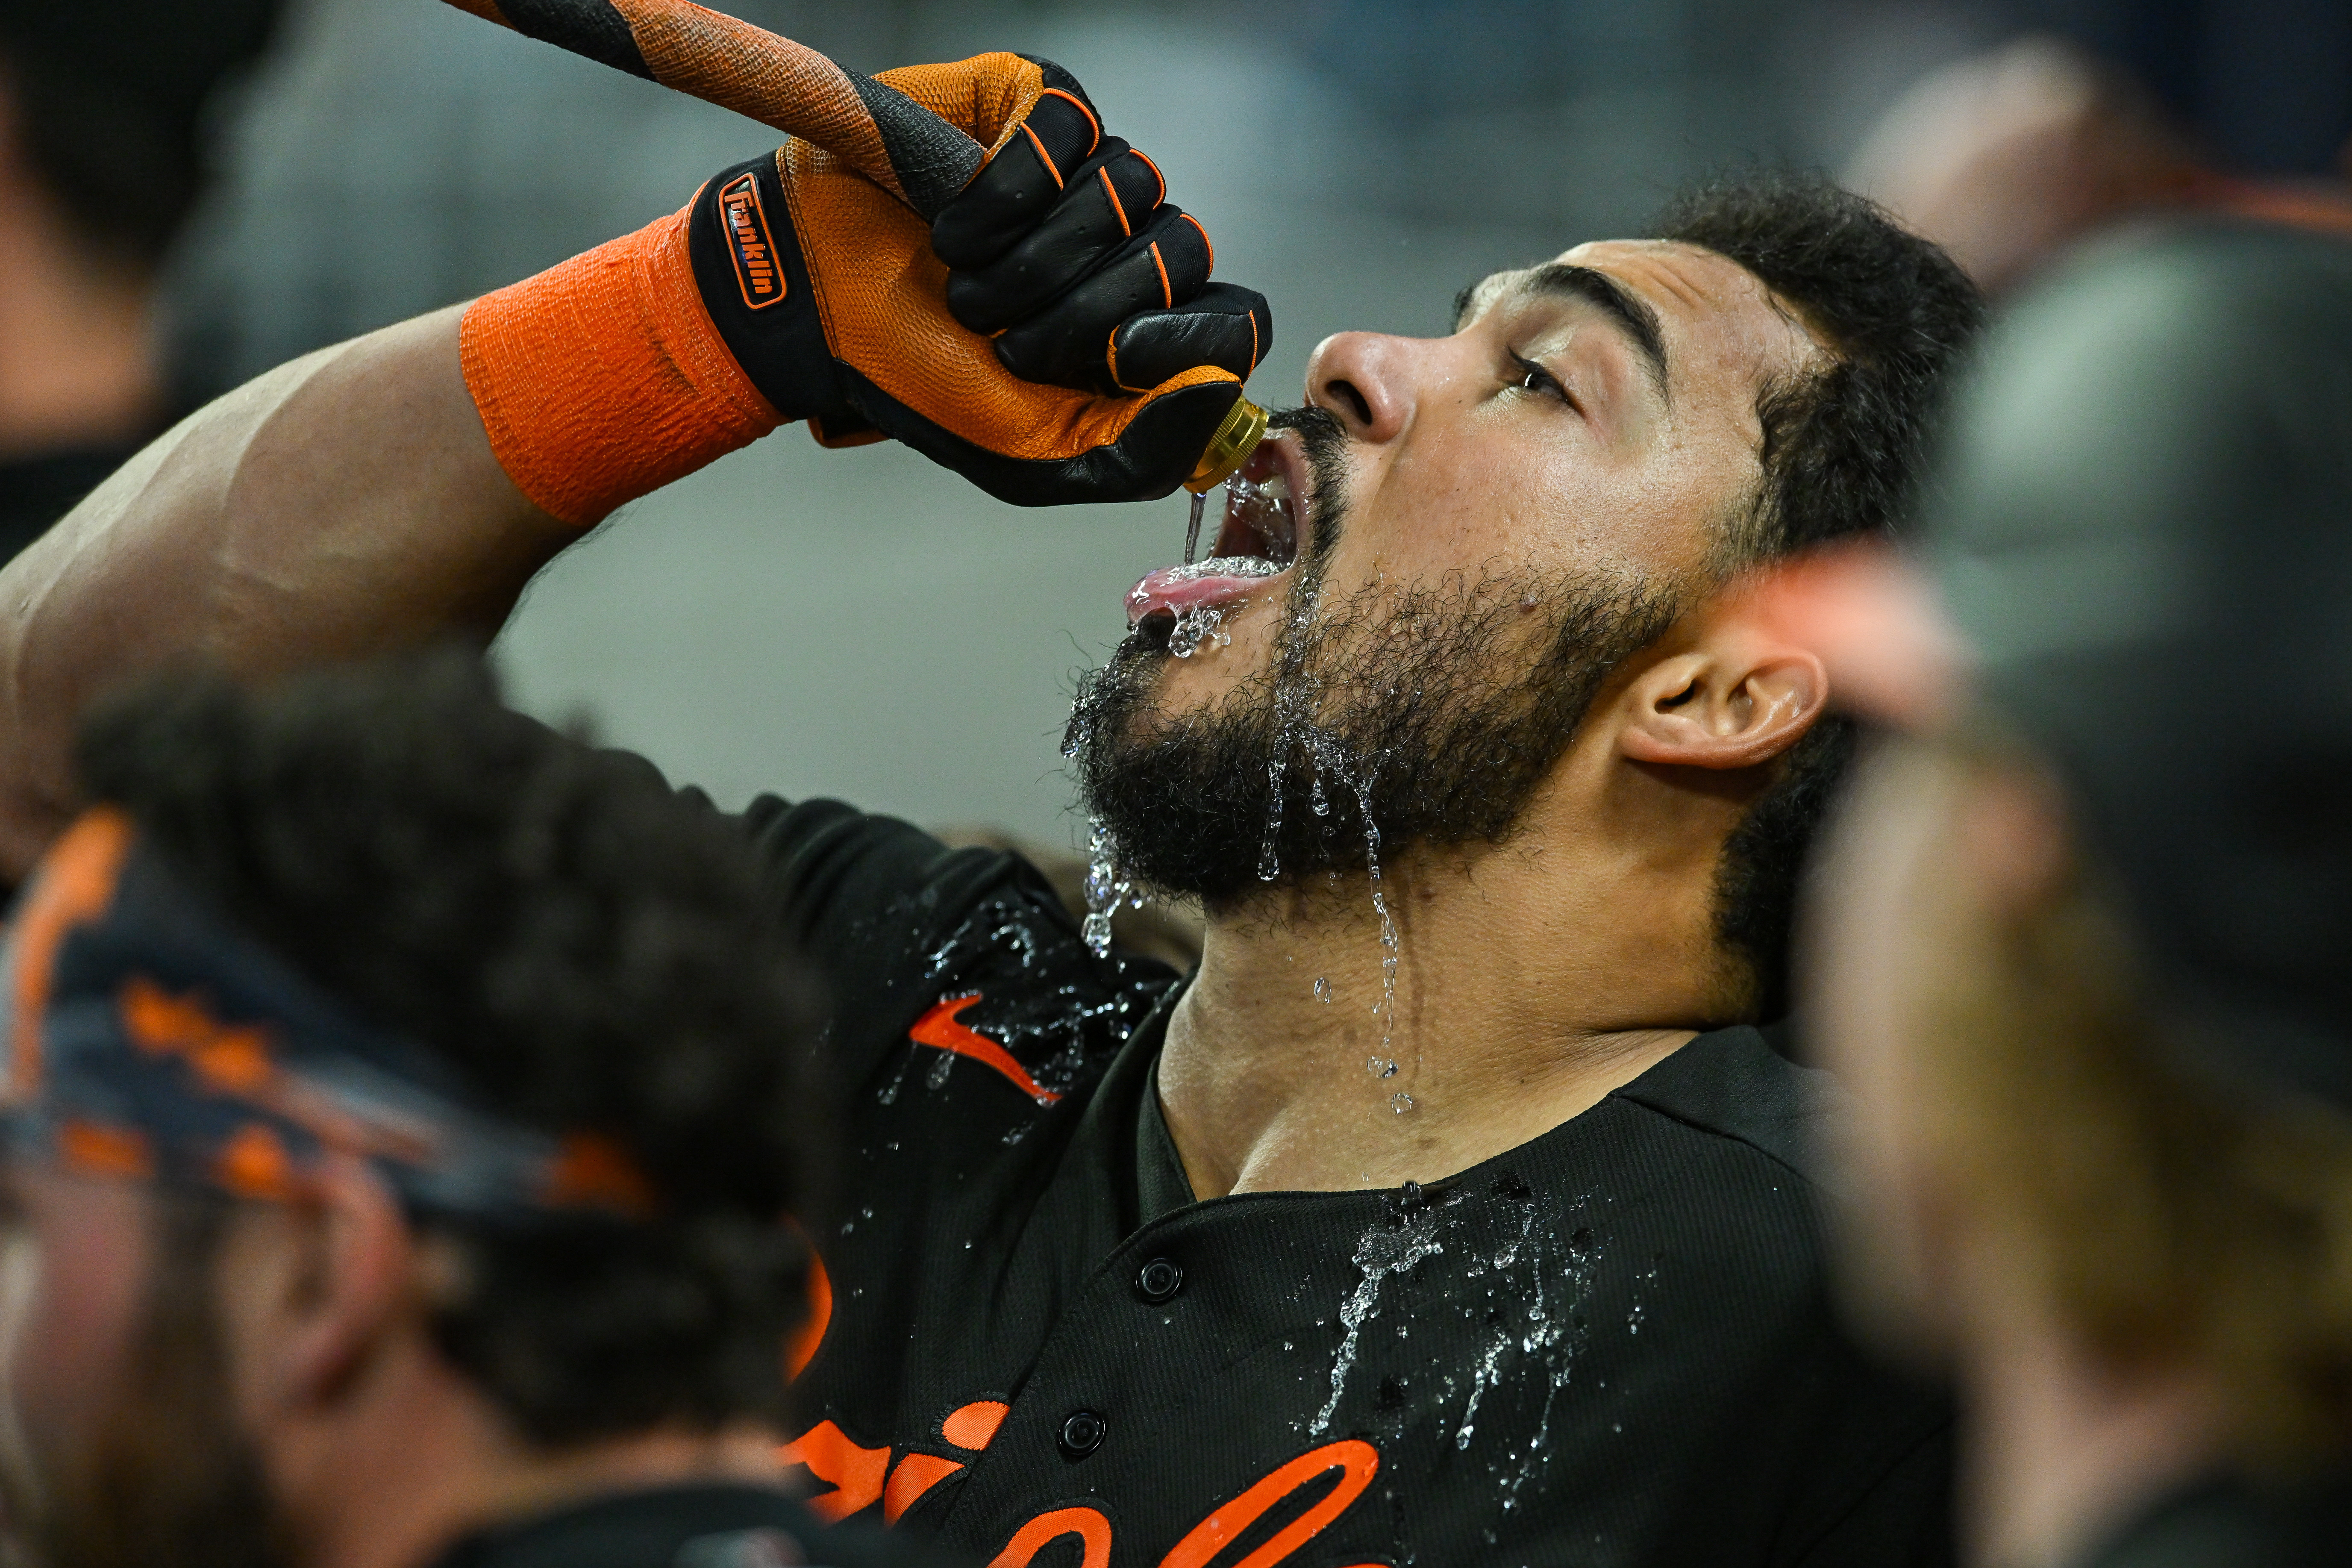 Orioles player Anthony Santander drinks water from a hose